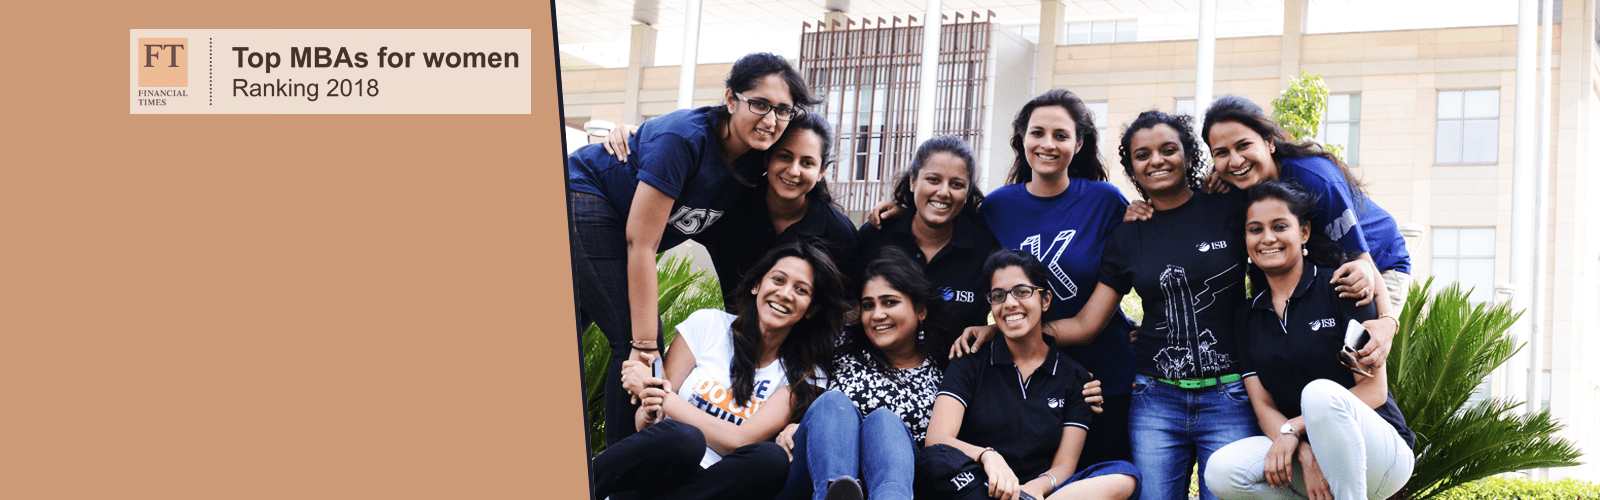 ISB ranks #26 in the Financial Times Top 50 MBAs for Women Ranking 2018